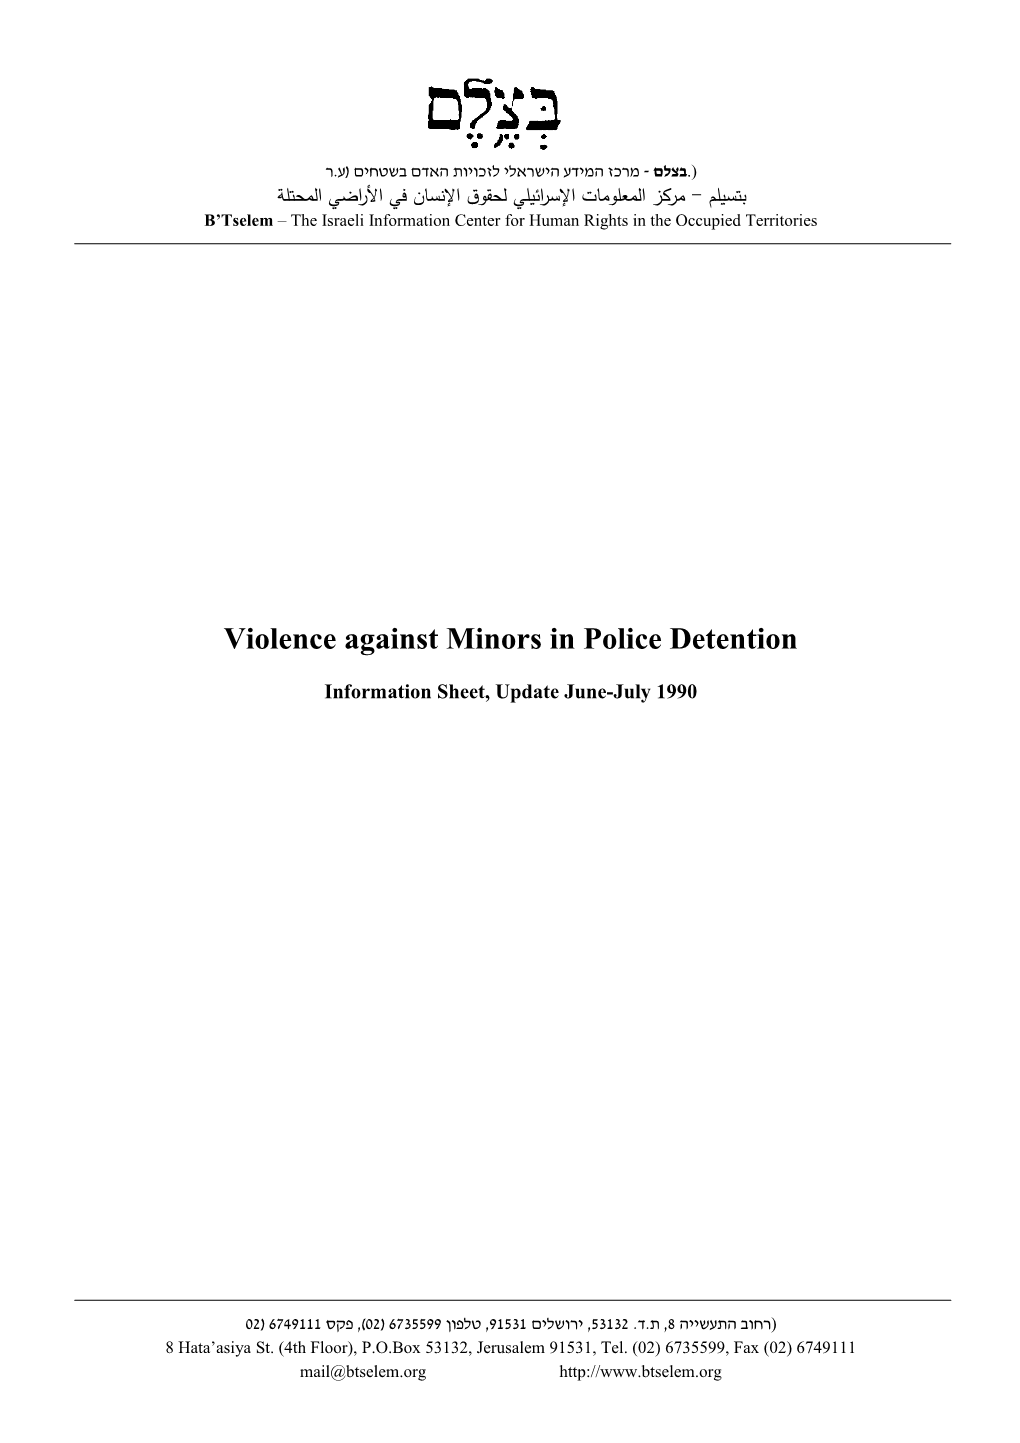 B'tselem Report: Violence Against Minors in Police Detention, Information Sheet, Update